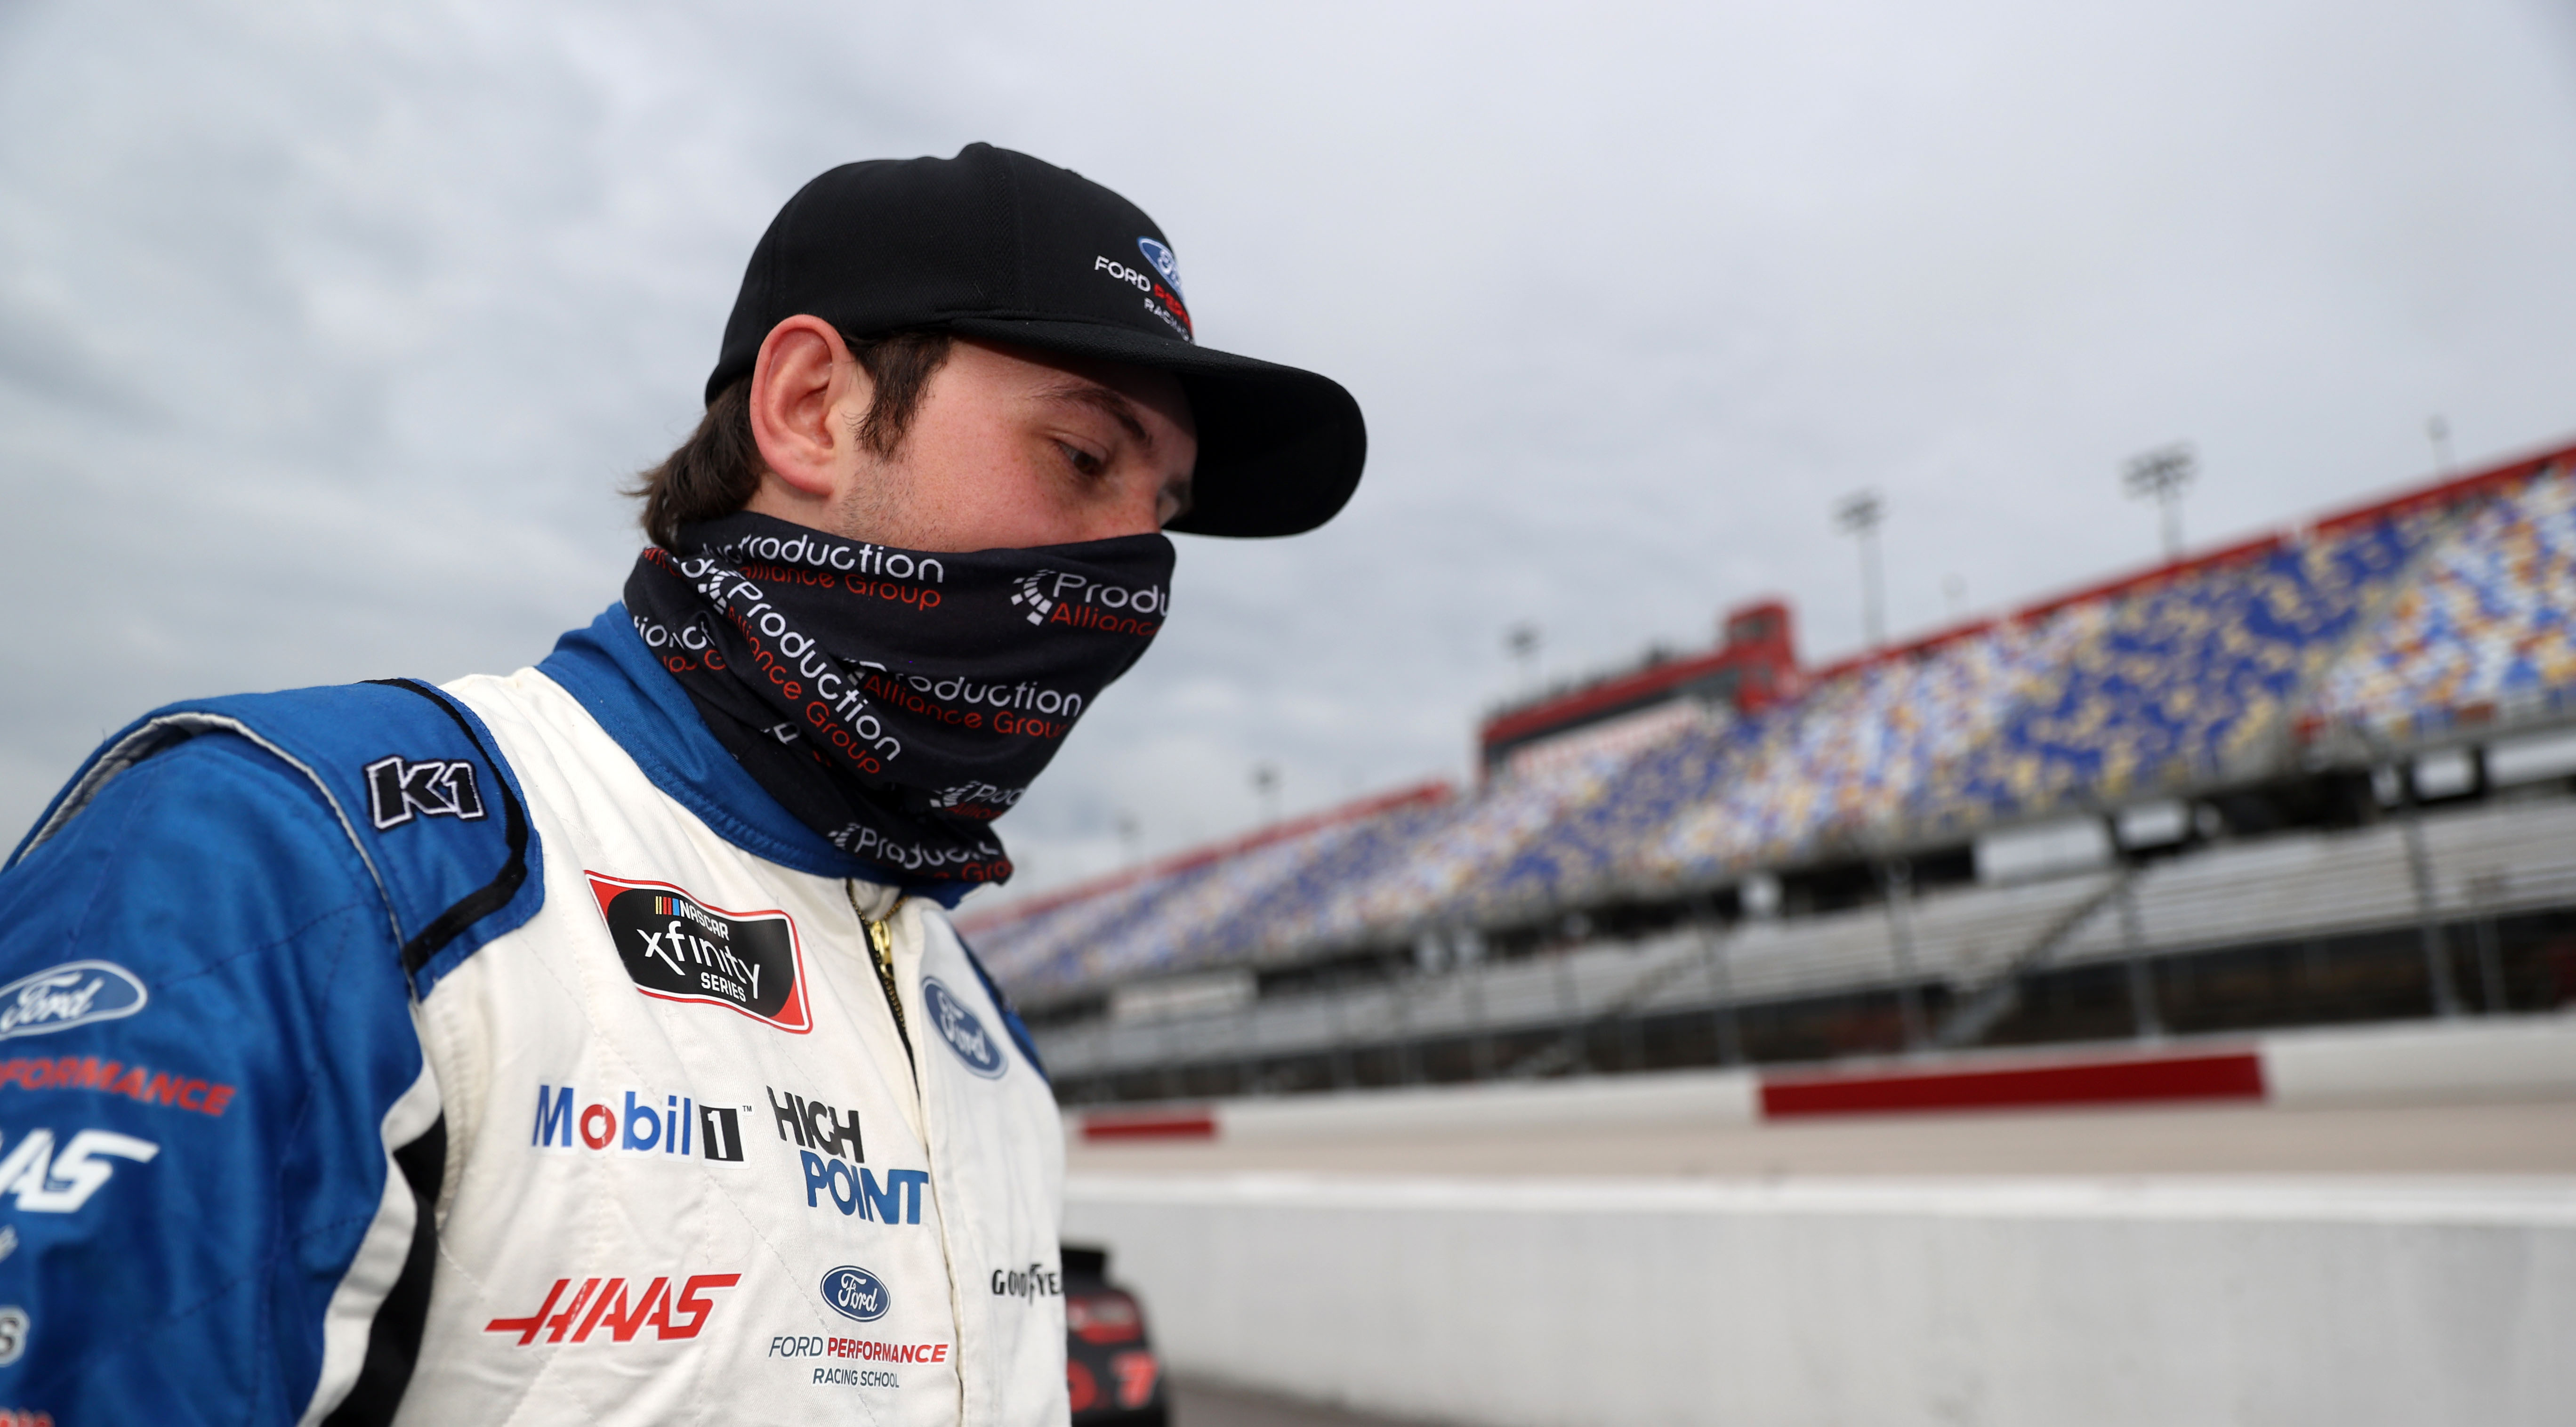 Nascar Driver Chase Briscoe Wins The Xfinity Series Race On Heels Of Personal Tragedy 